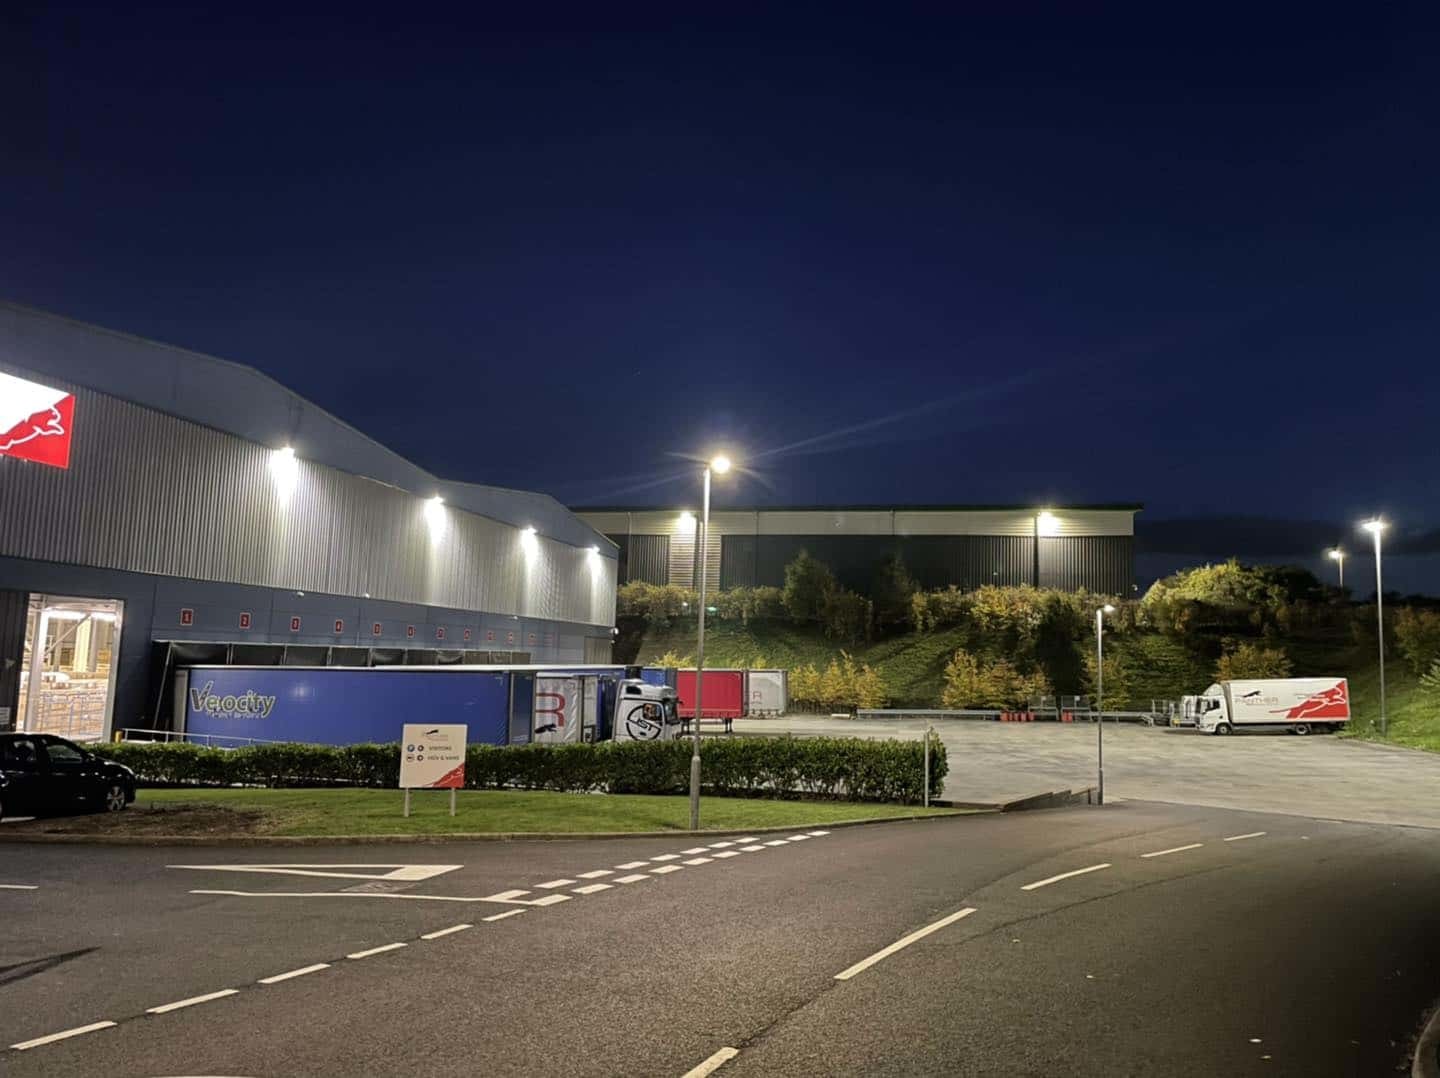 Asymetric lighting at a logistics hub in North East England